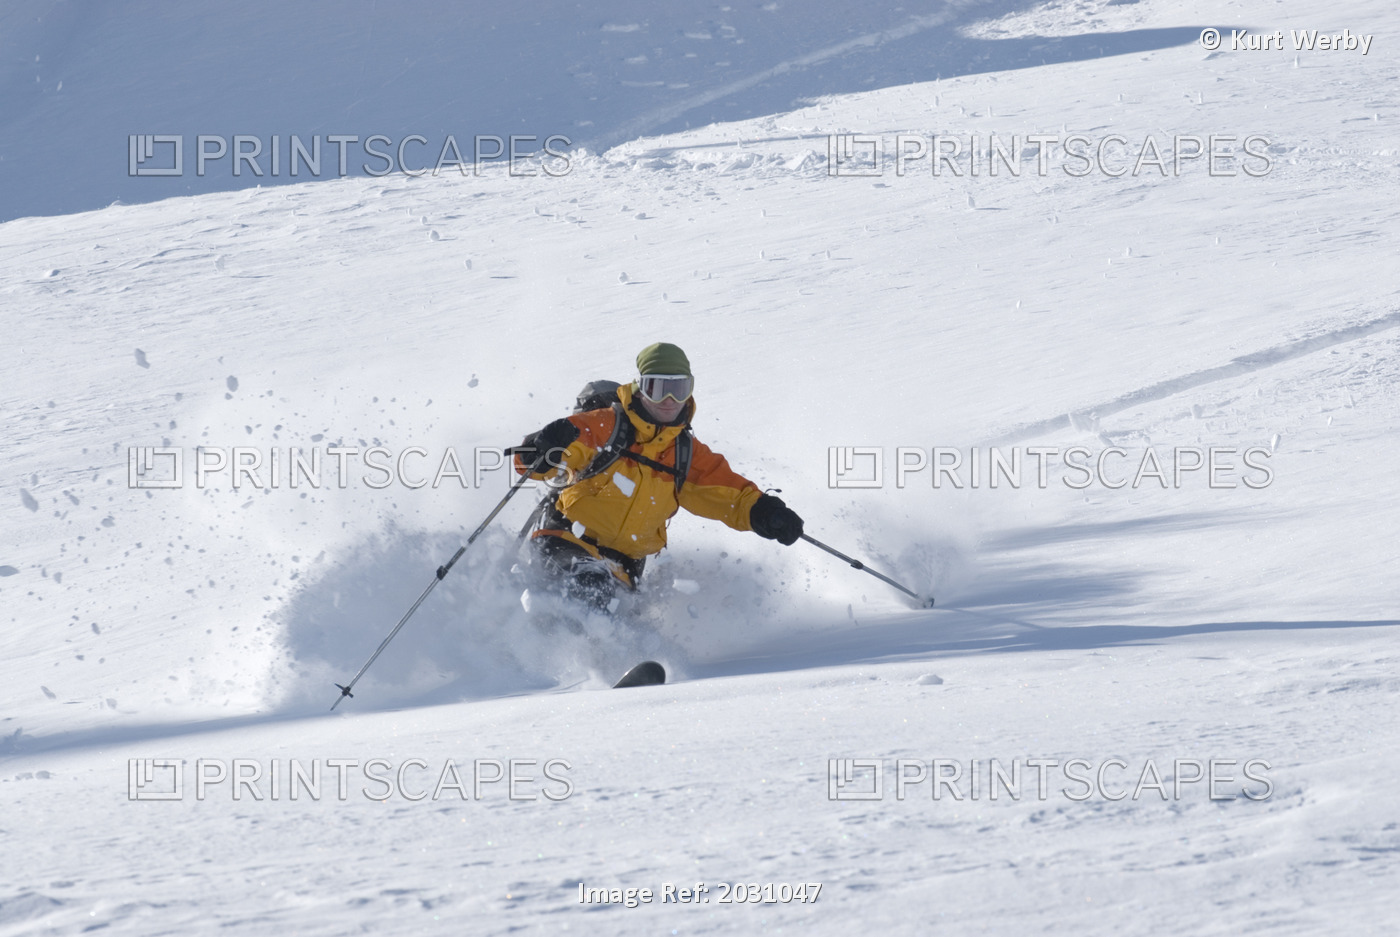 Skier Carving Turns Into Marriot Basin, Coast Mountains, British Columbia